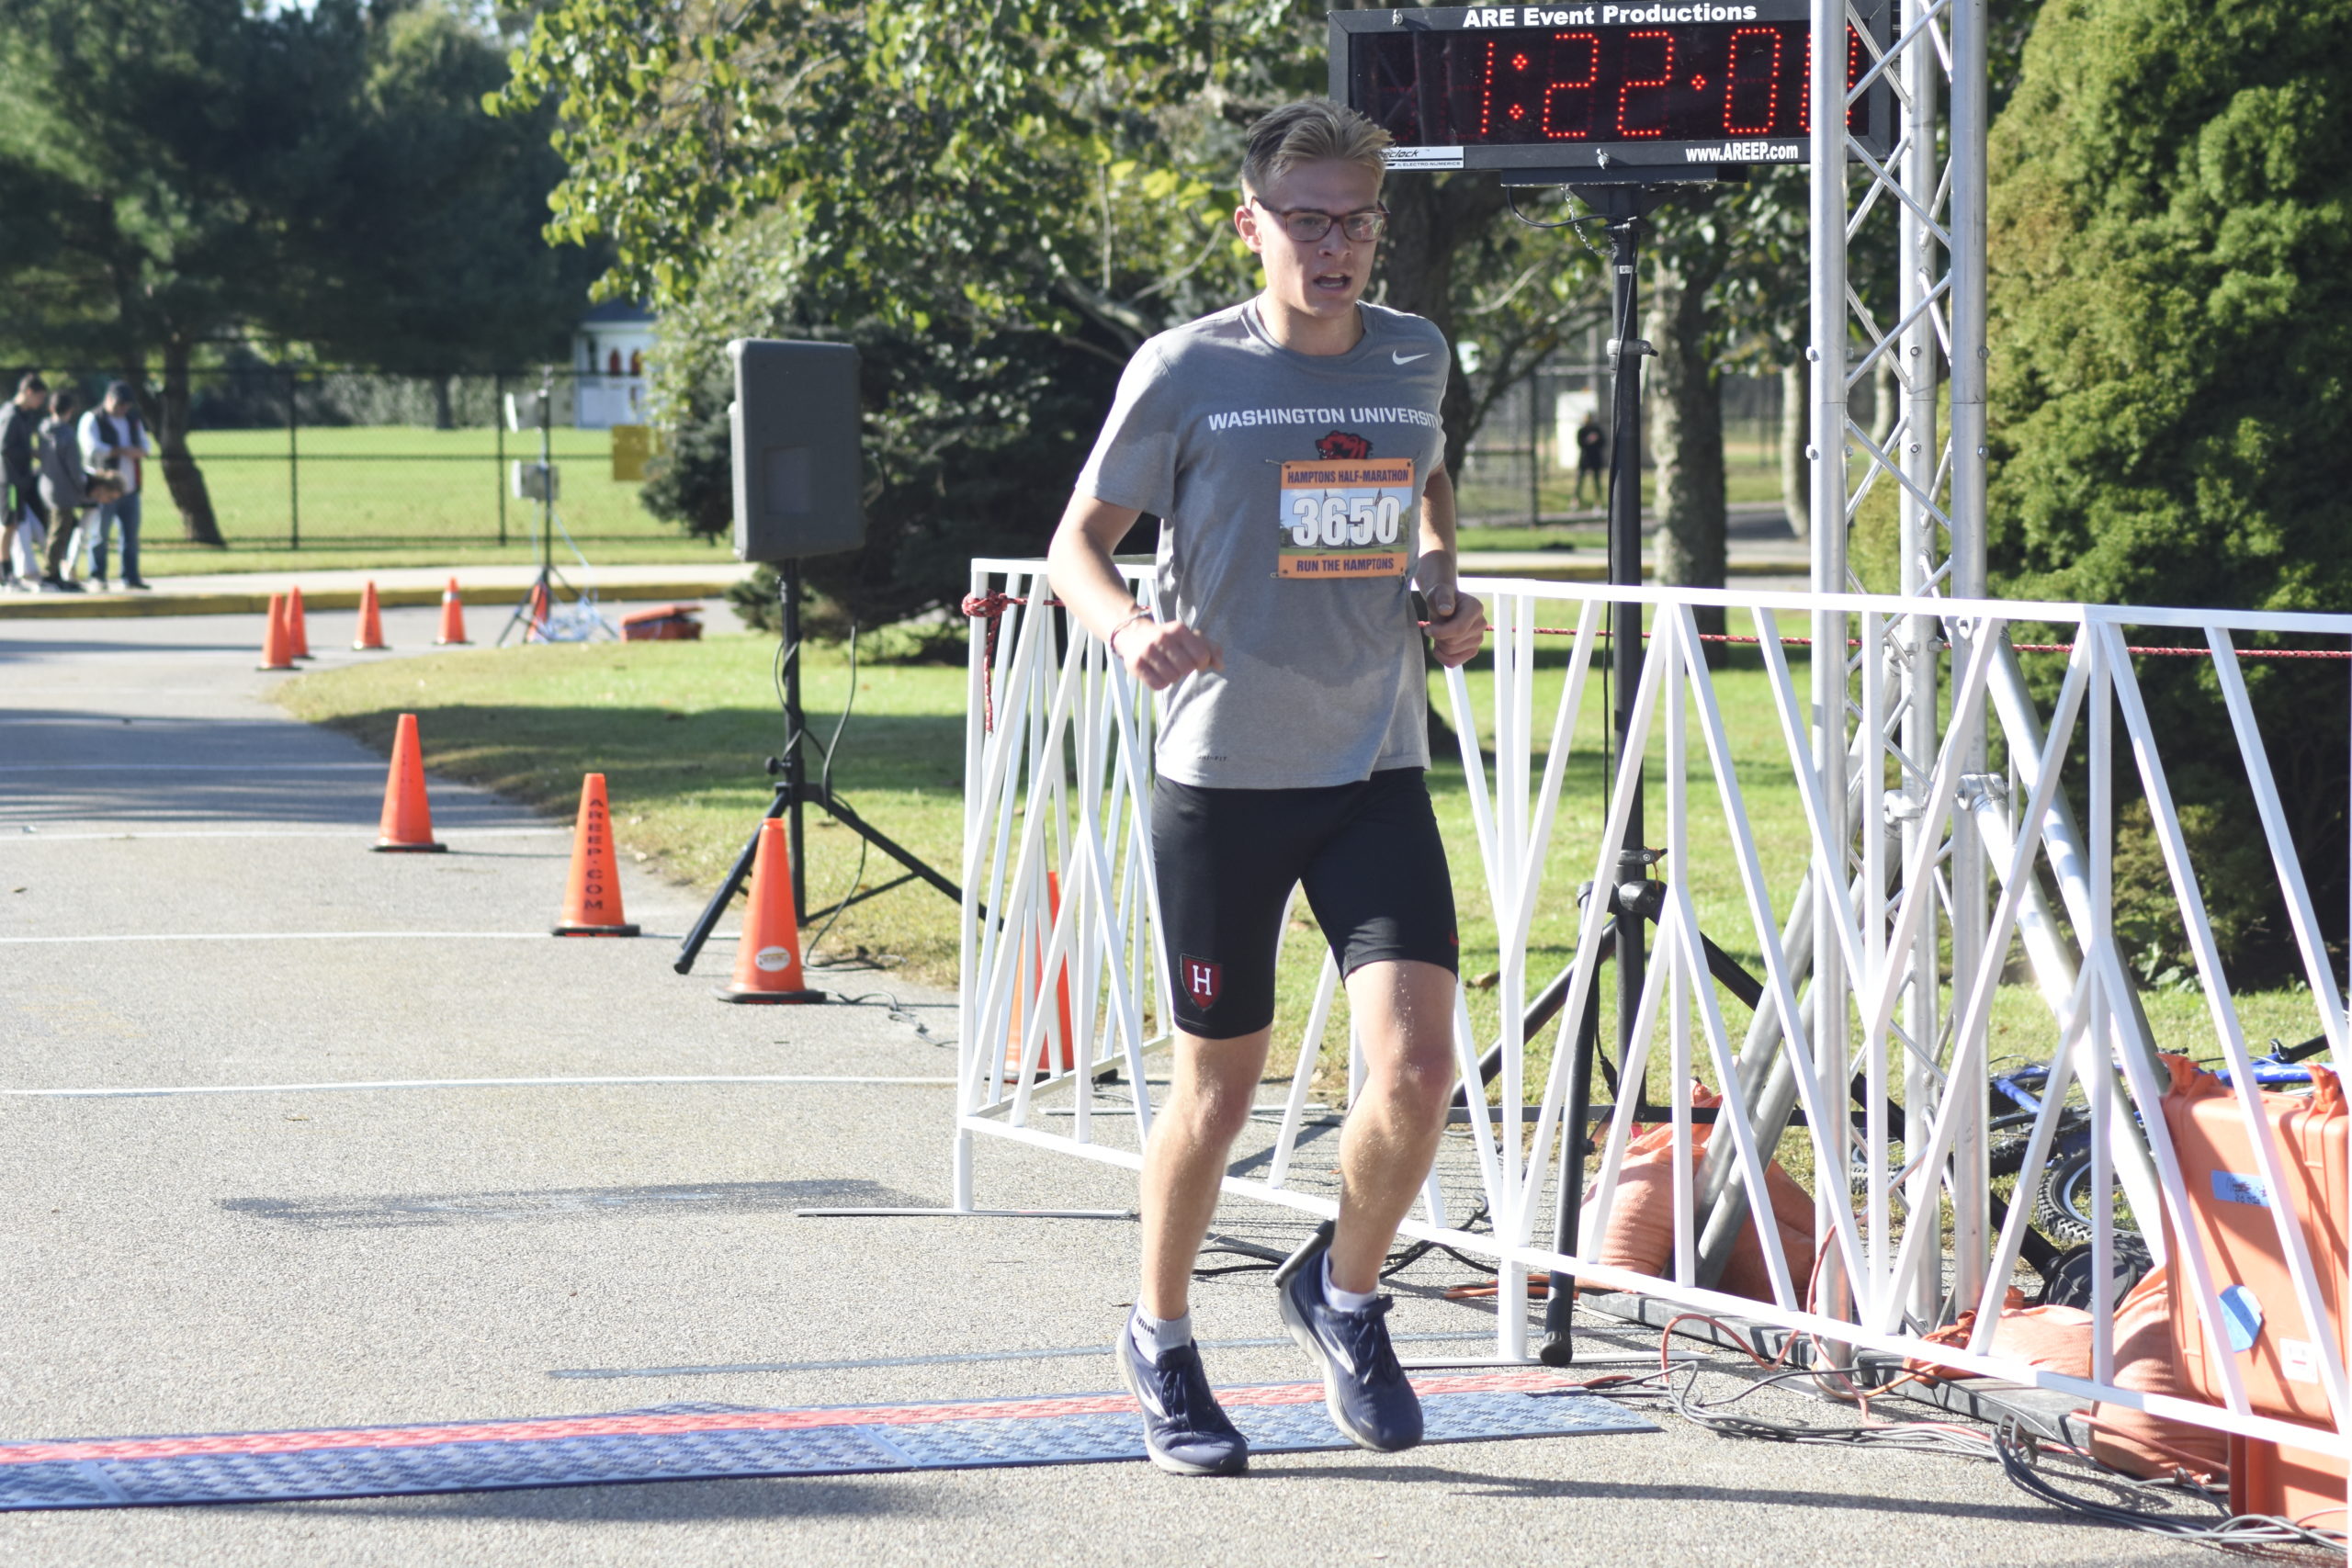 Christian Oakley of Southampton placed seventh overall in the Hamptons Half Marathon.